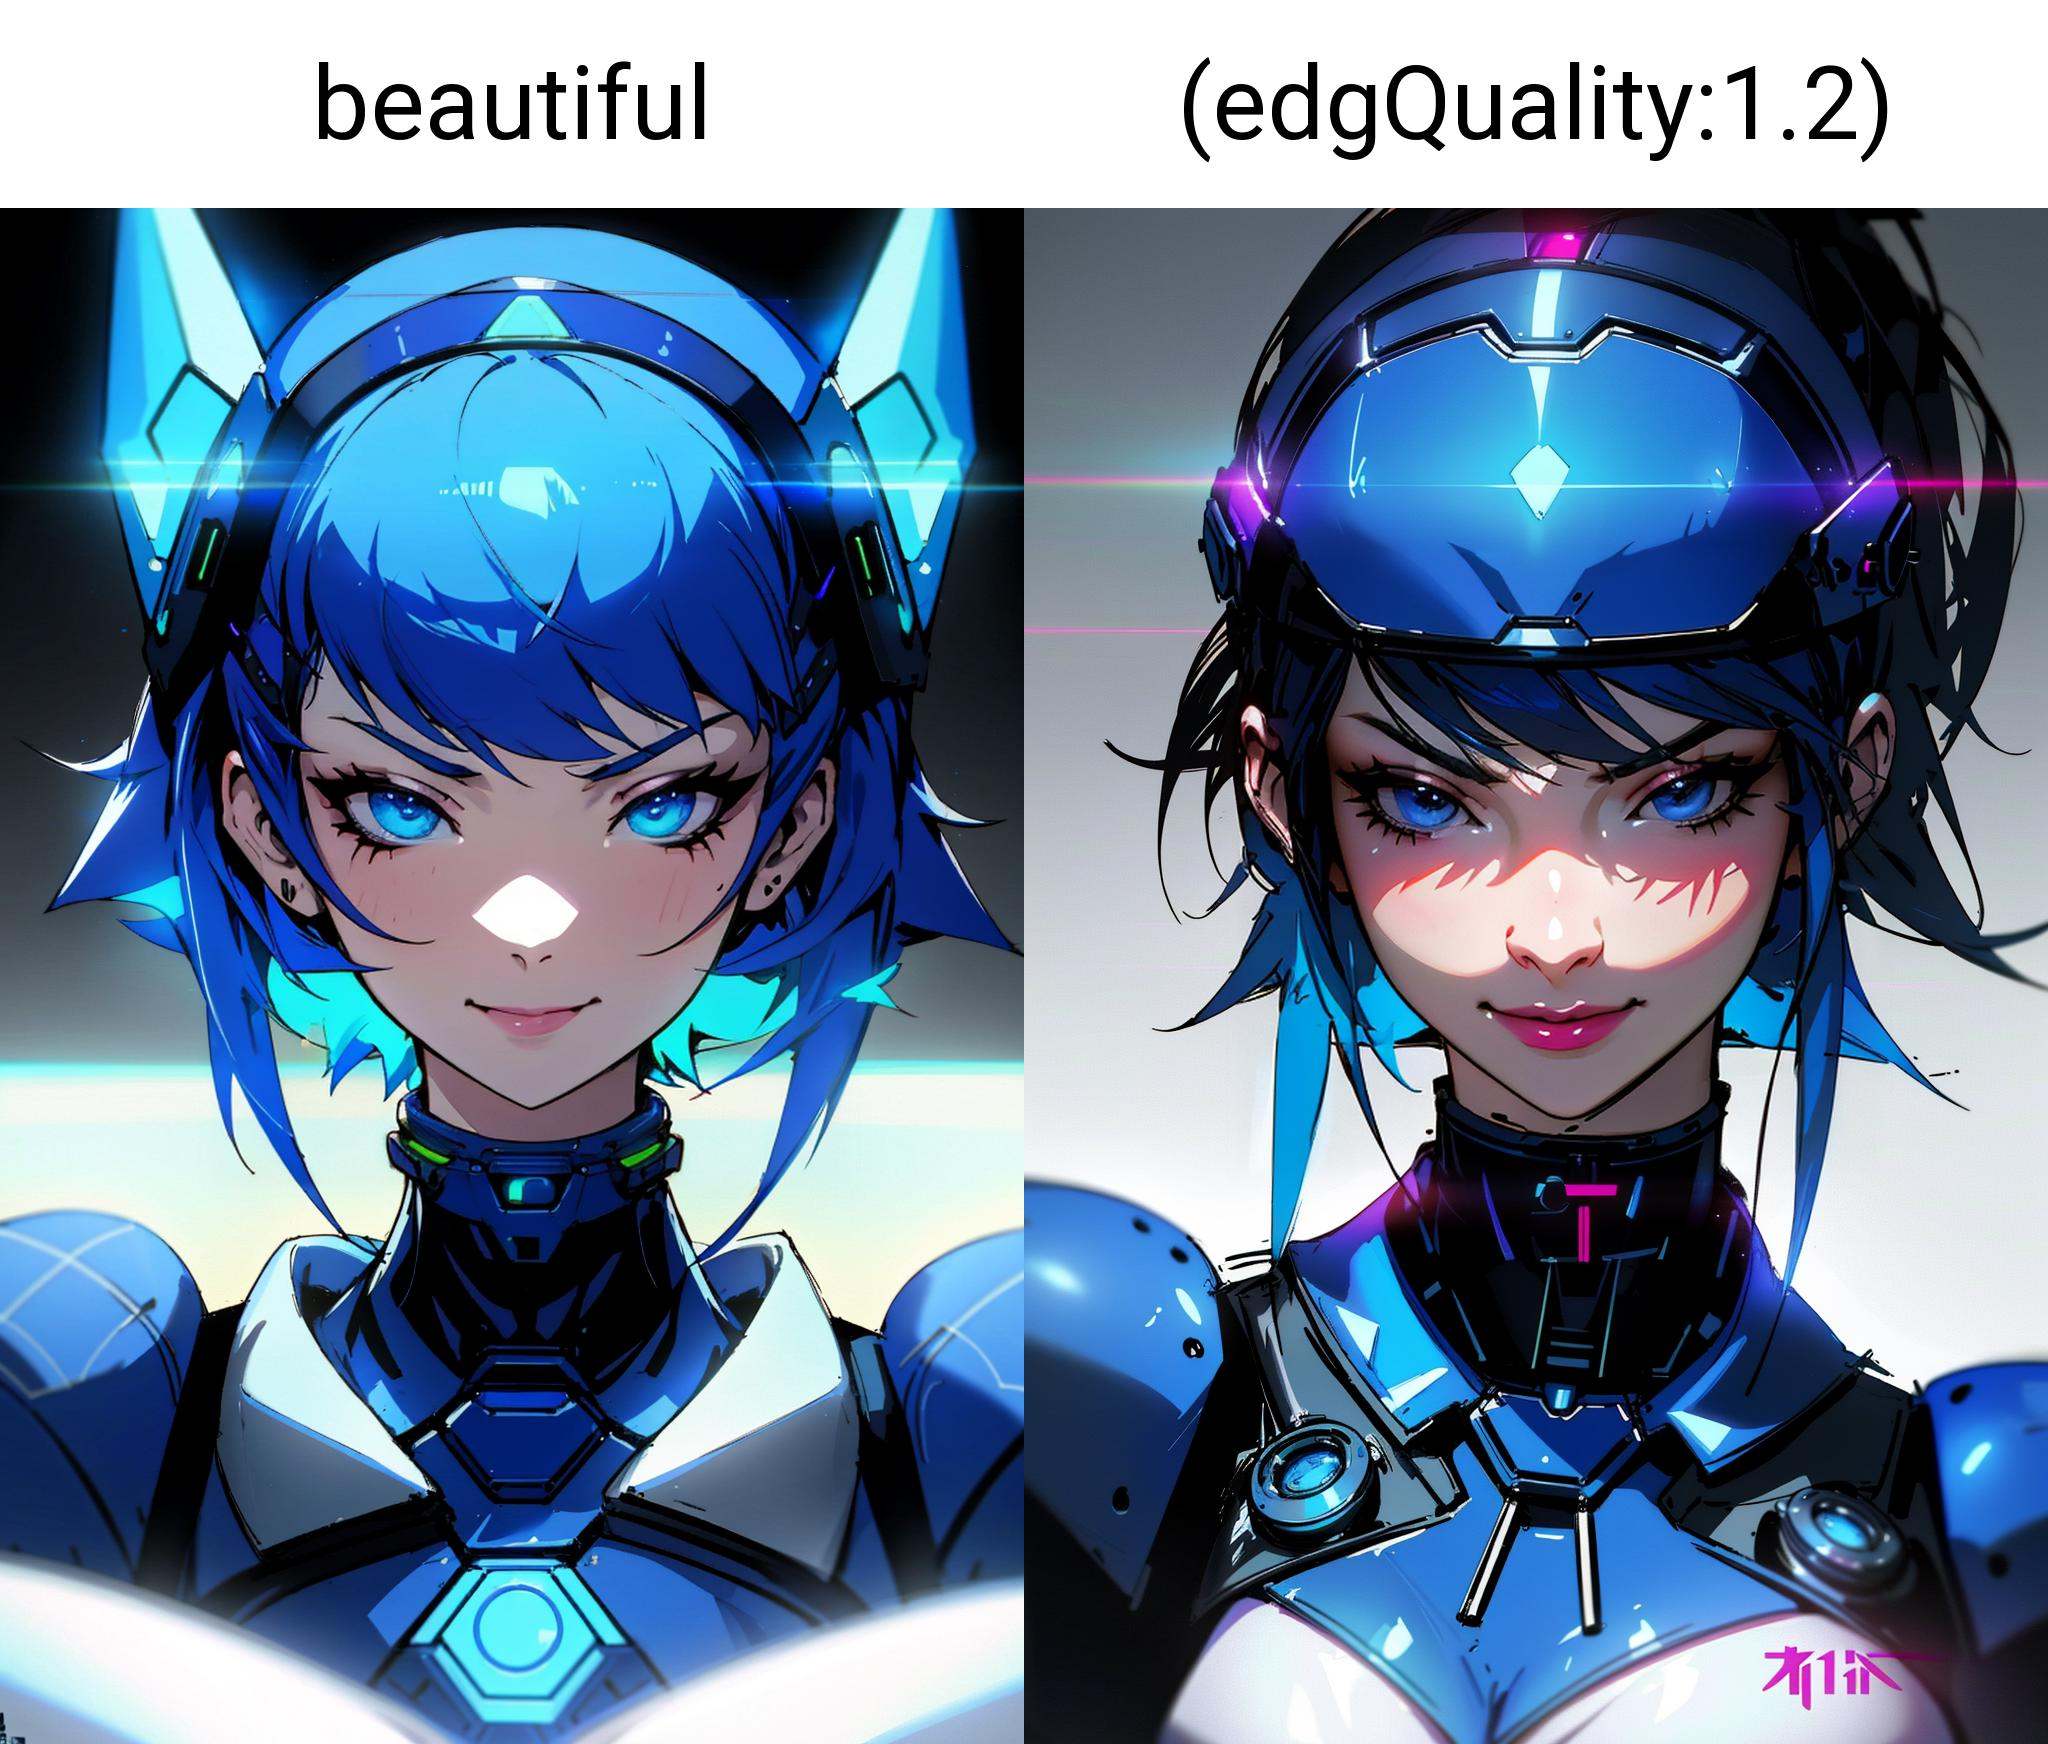 (portrait)((Masterpiece, best quality)),beautiful,smirk,smug, ([ballgown|edgFut_clothing]::0.5), a woman with a blue face and a clear helmet ,wearing edgFut_clothing and [futuristic headpiece|visor] ,wearing edgFut_clothing, neons, electric circuits <lora:edgFuturisticGown1:0.8>